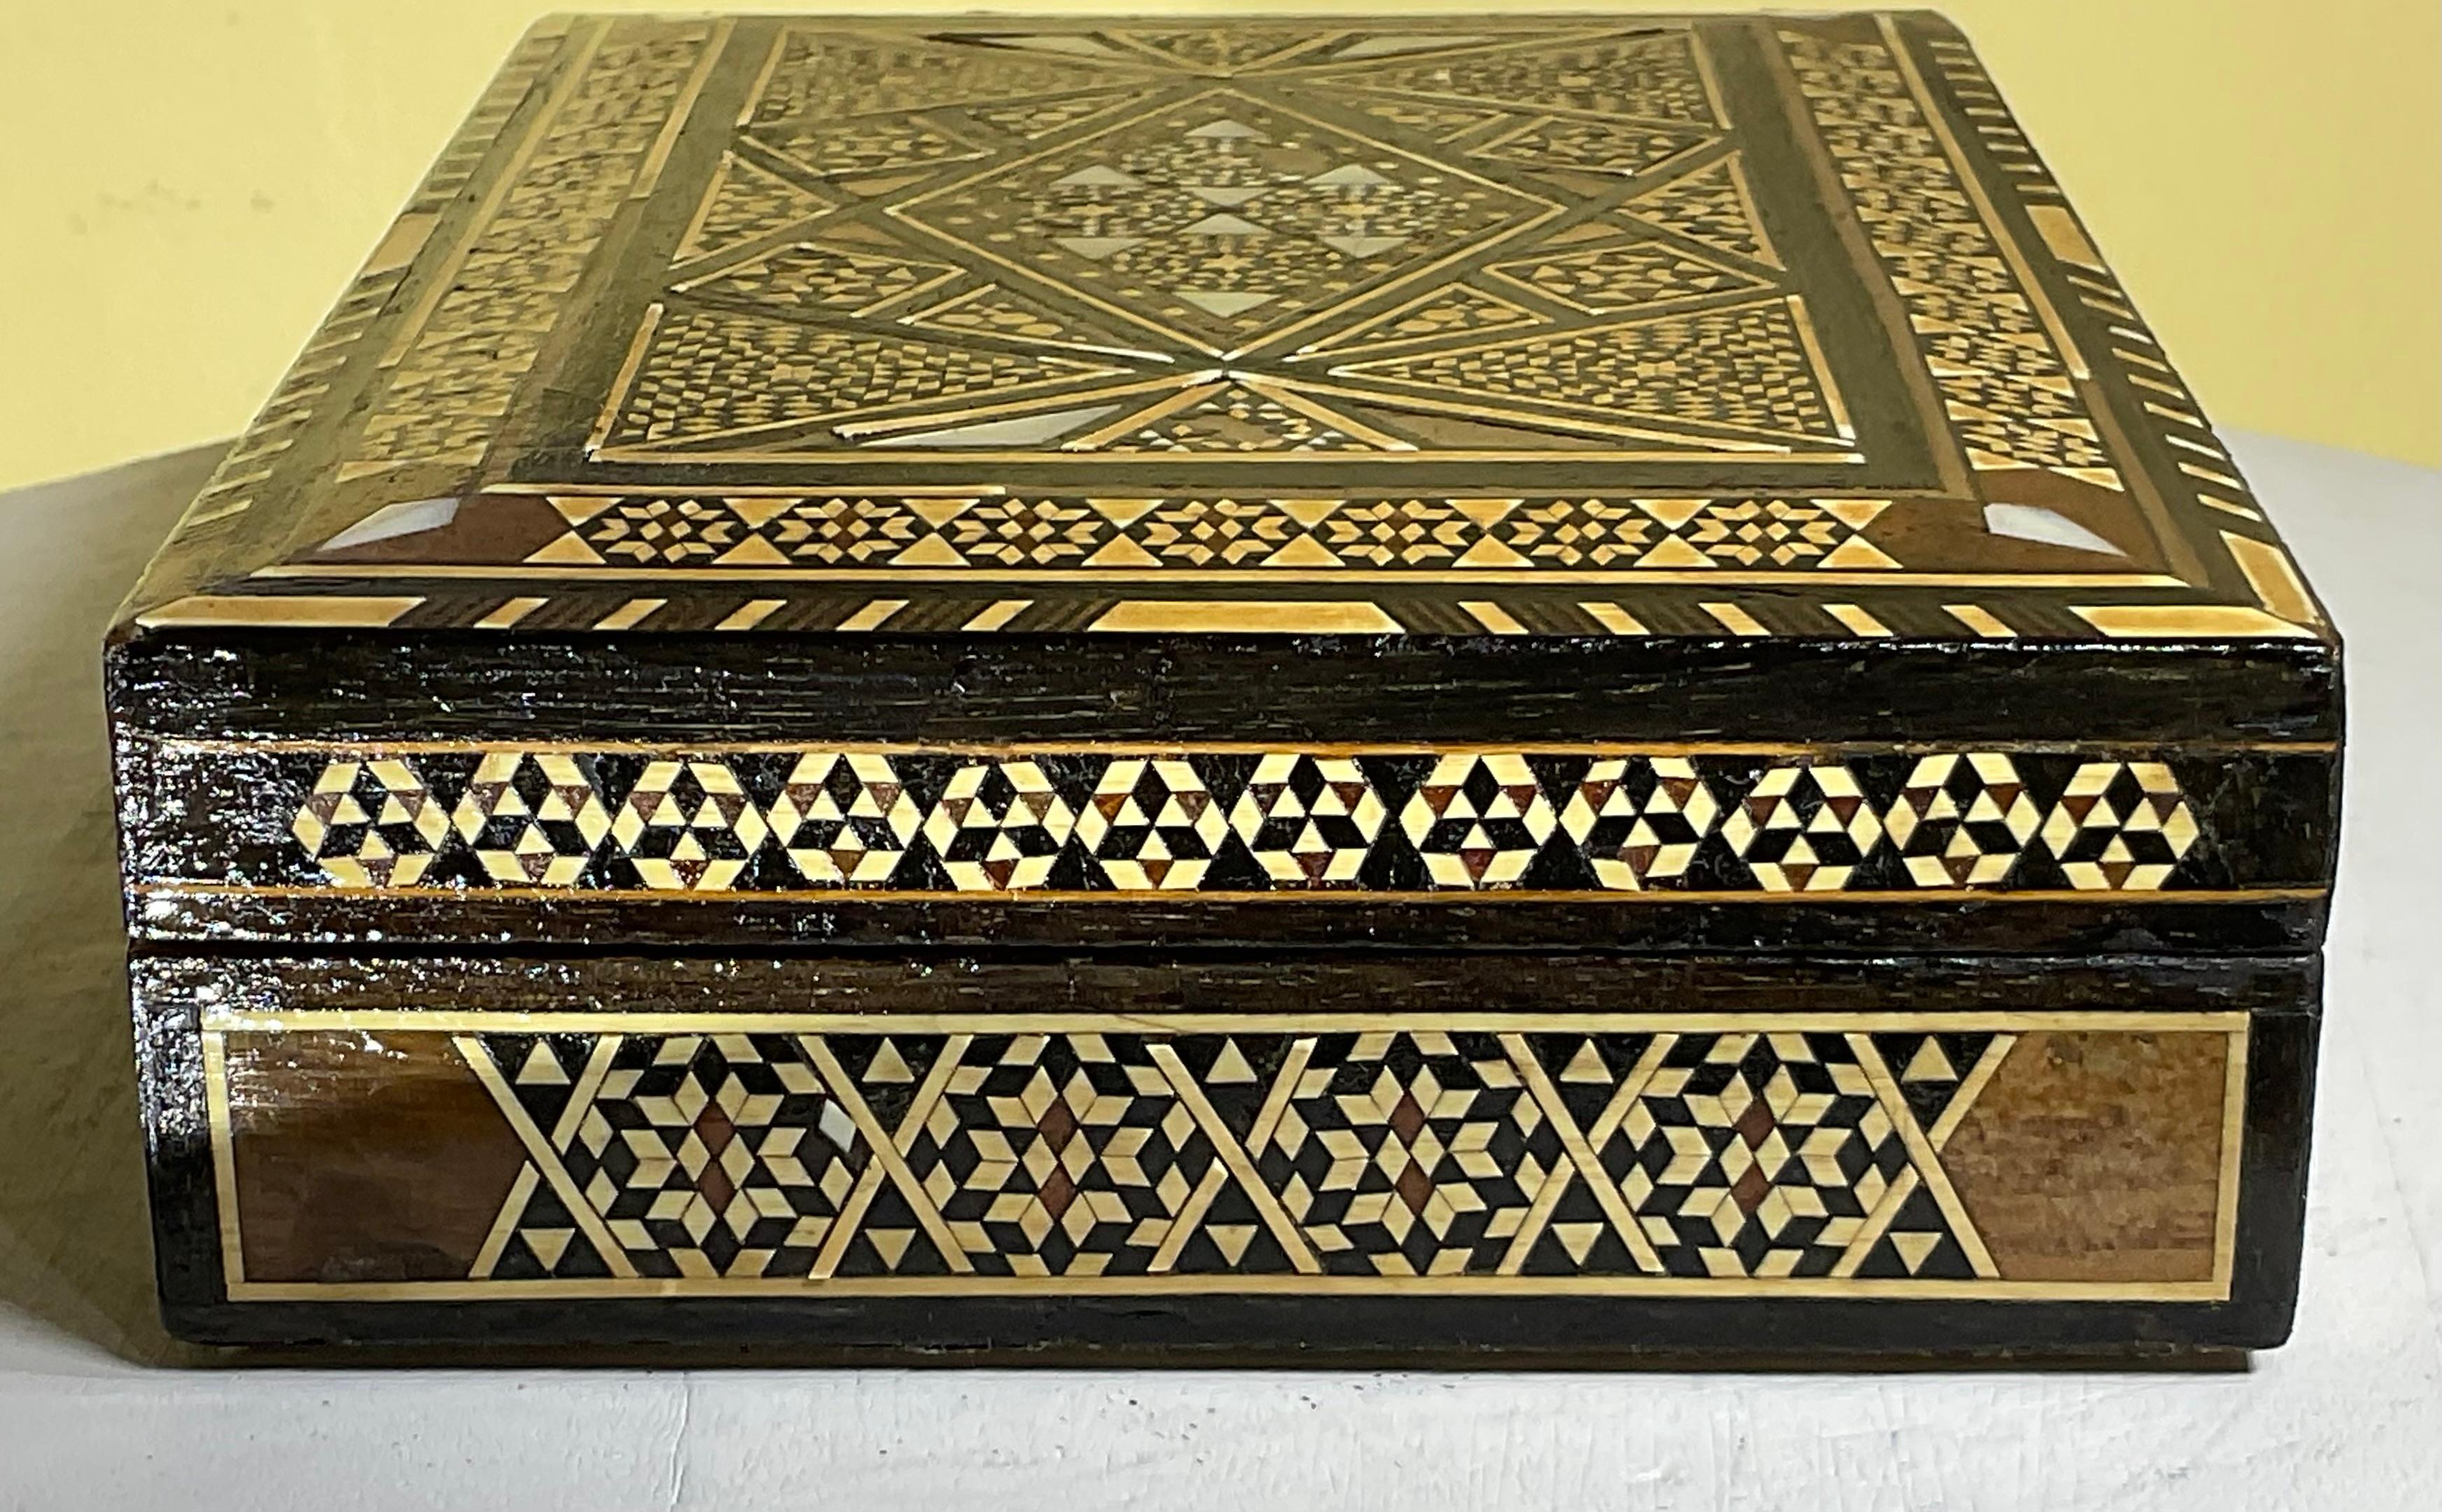  exquisite middle Eastern Moorish Syrian inlay jewelry box. This box is intricately inlaid with Moorish motif designs which have been uniquely inlaid with bone, mother of pearl and fruitwood.
 The box was professionally fully restored , some inlay